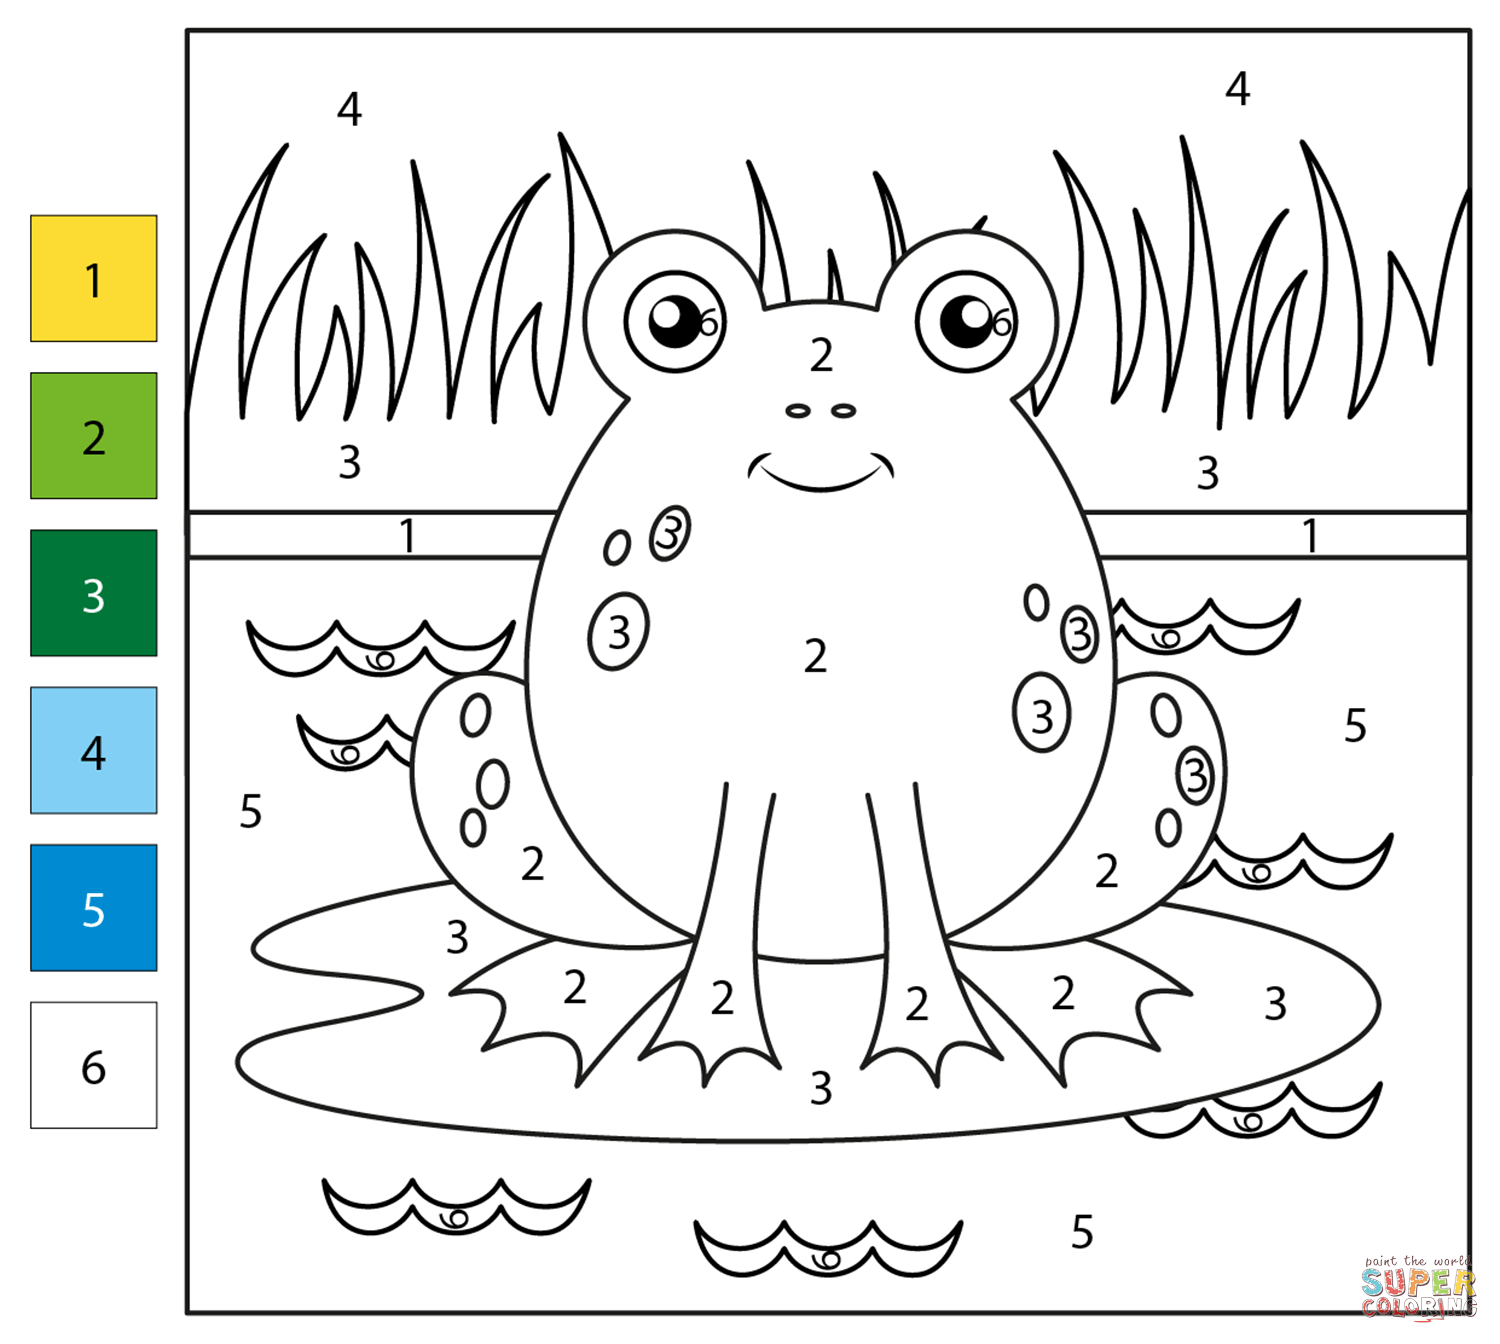 Frog color by number free printable coloring pages